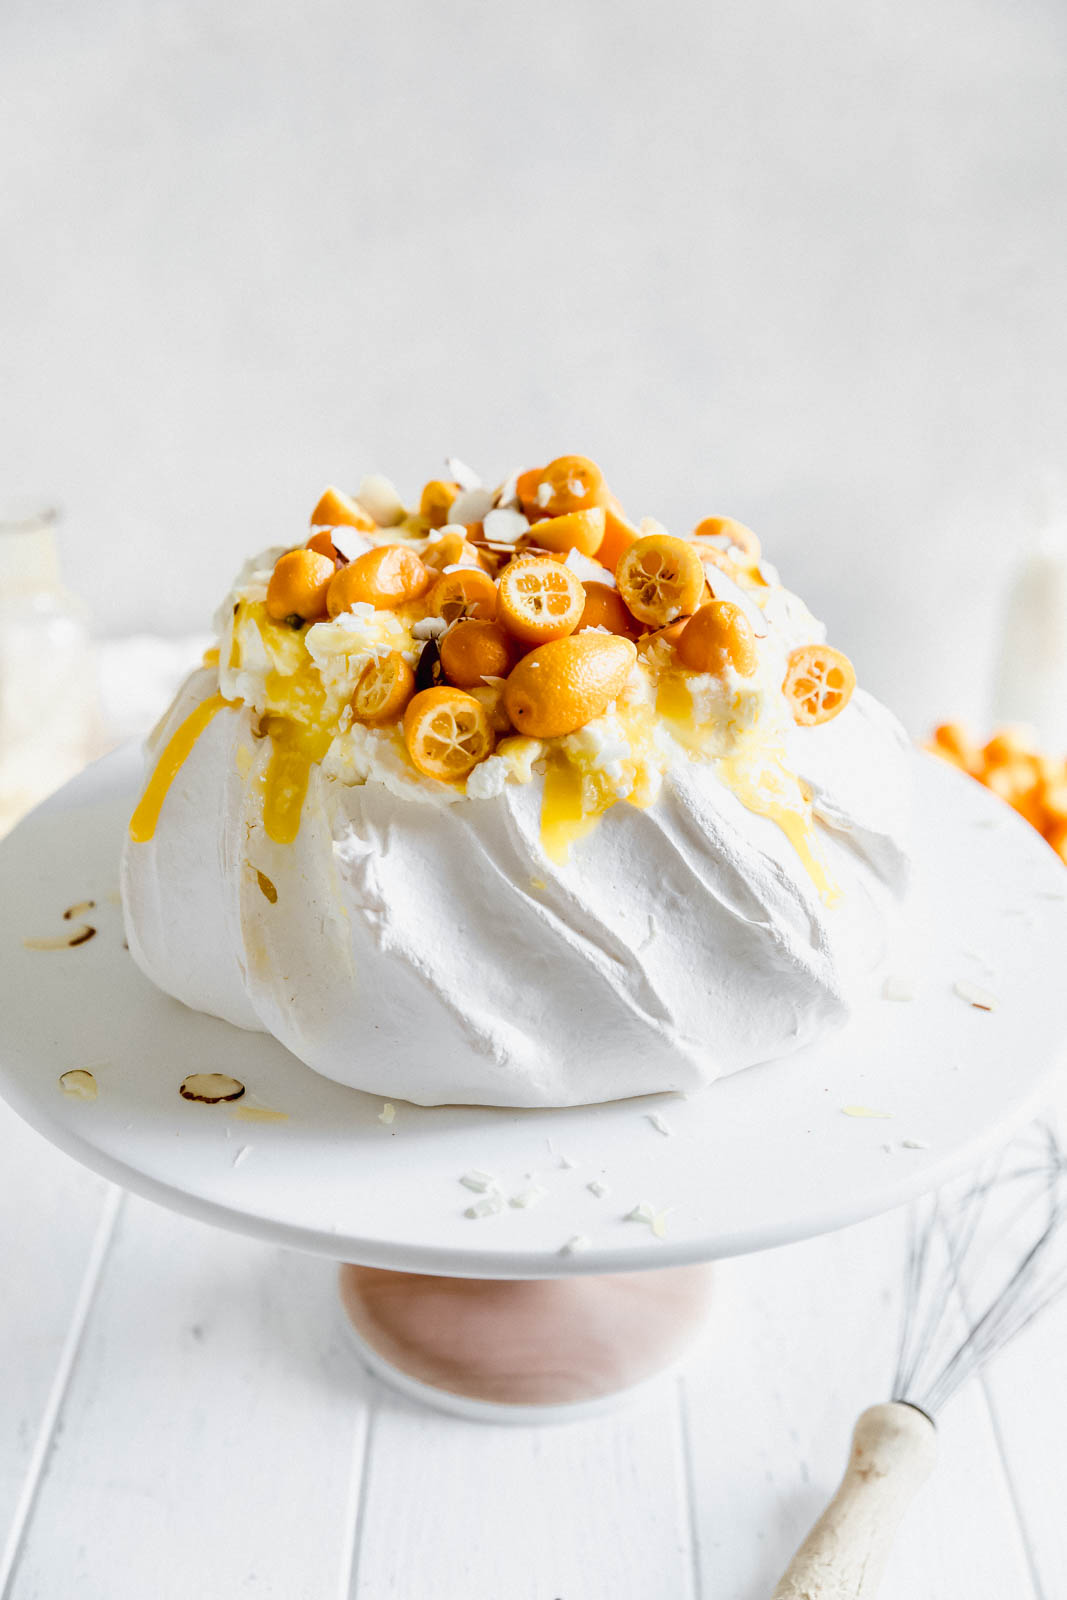 Make everyone say HUBBA HUBBA with this showstopping white chocolate and lemon curd pavlova topped with baby kumquats and sliced almonds. 